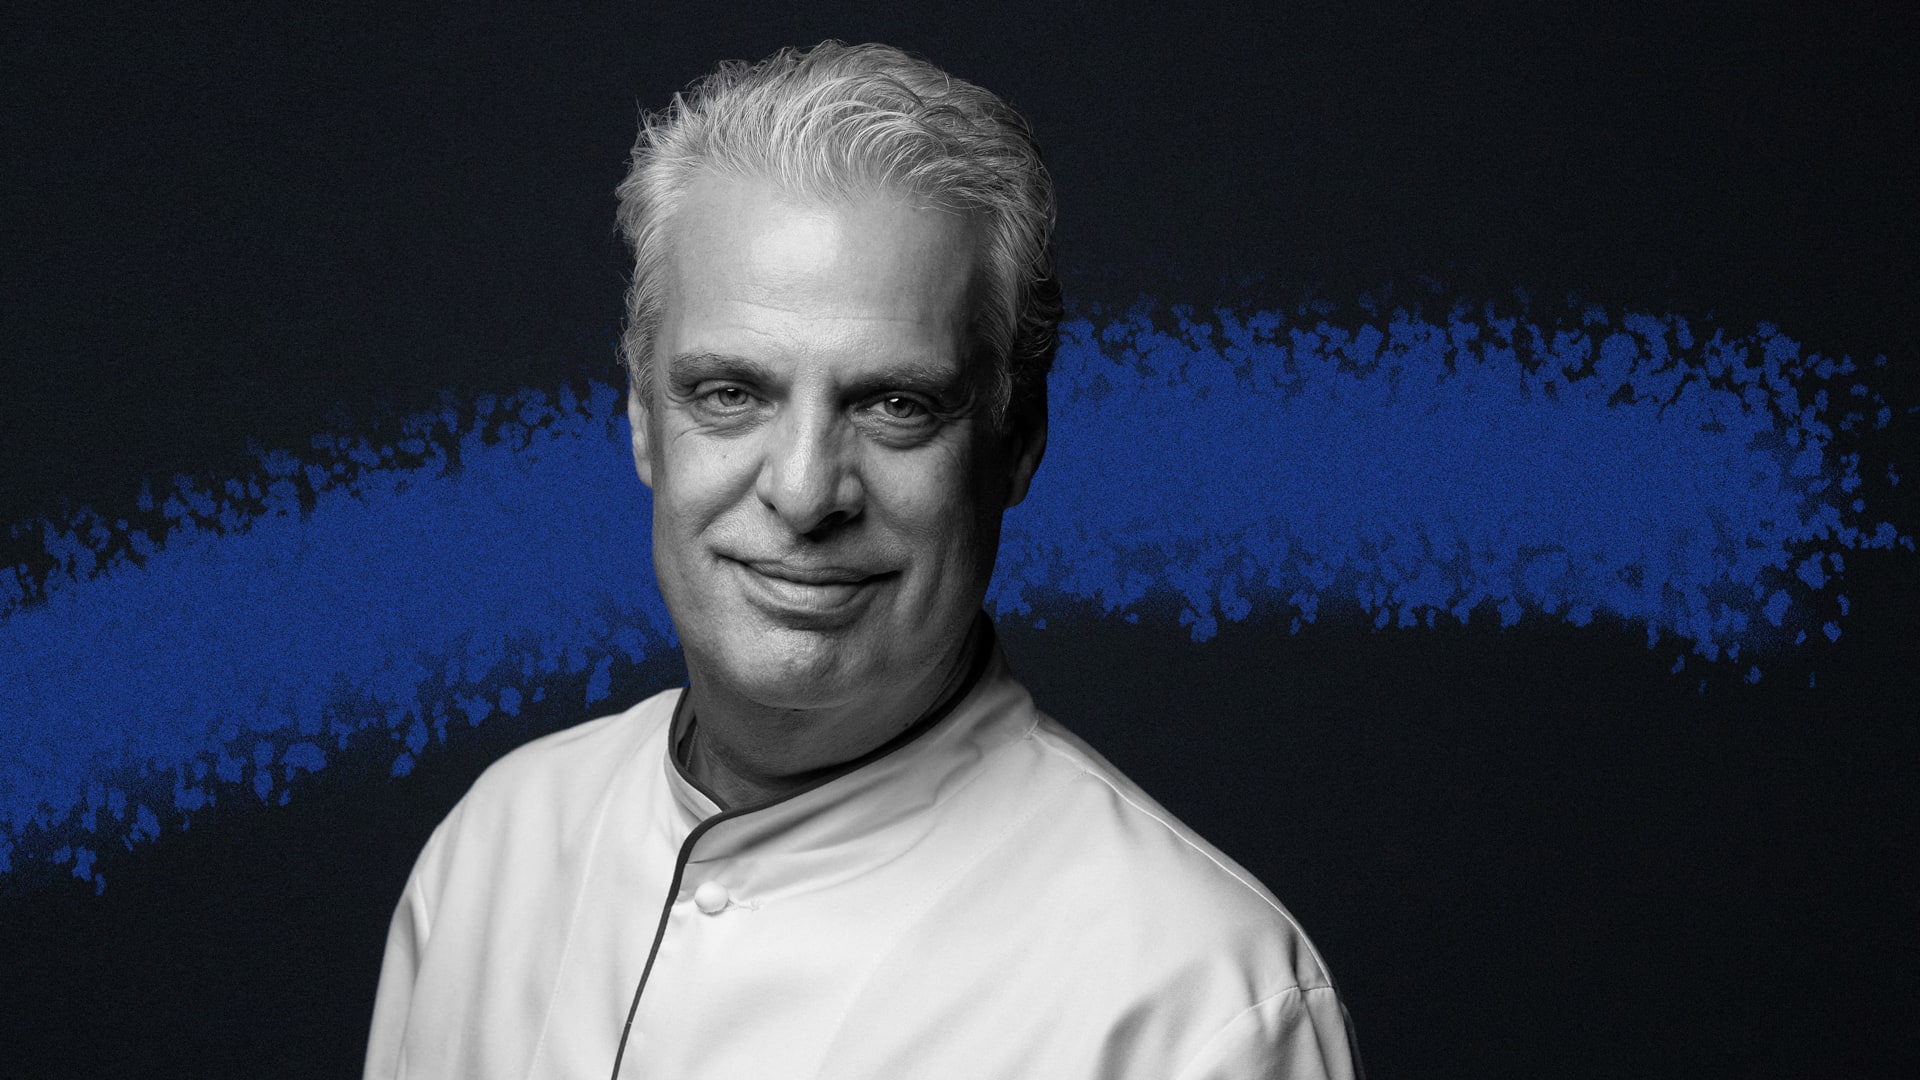 Eric Ripert: I learned the hard way that you don’t get better results if your team is scared